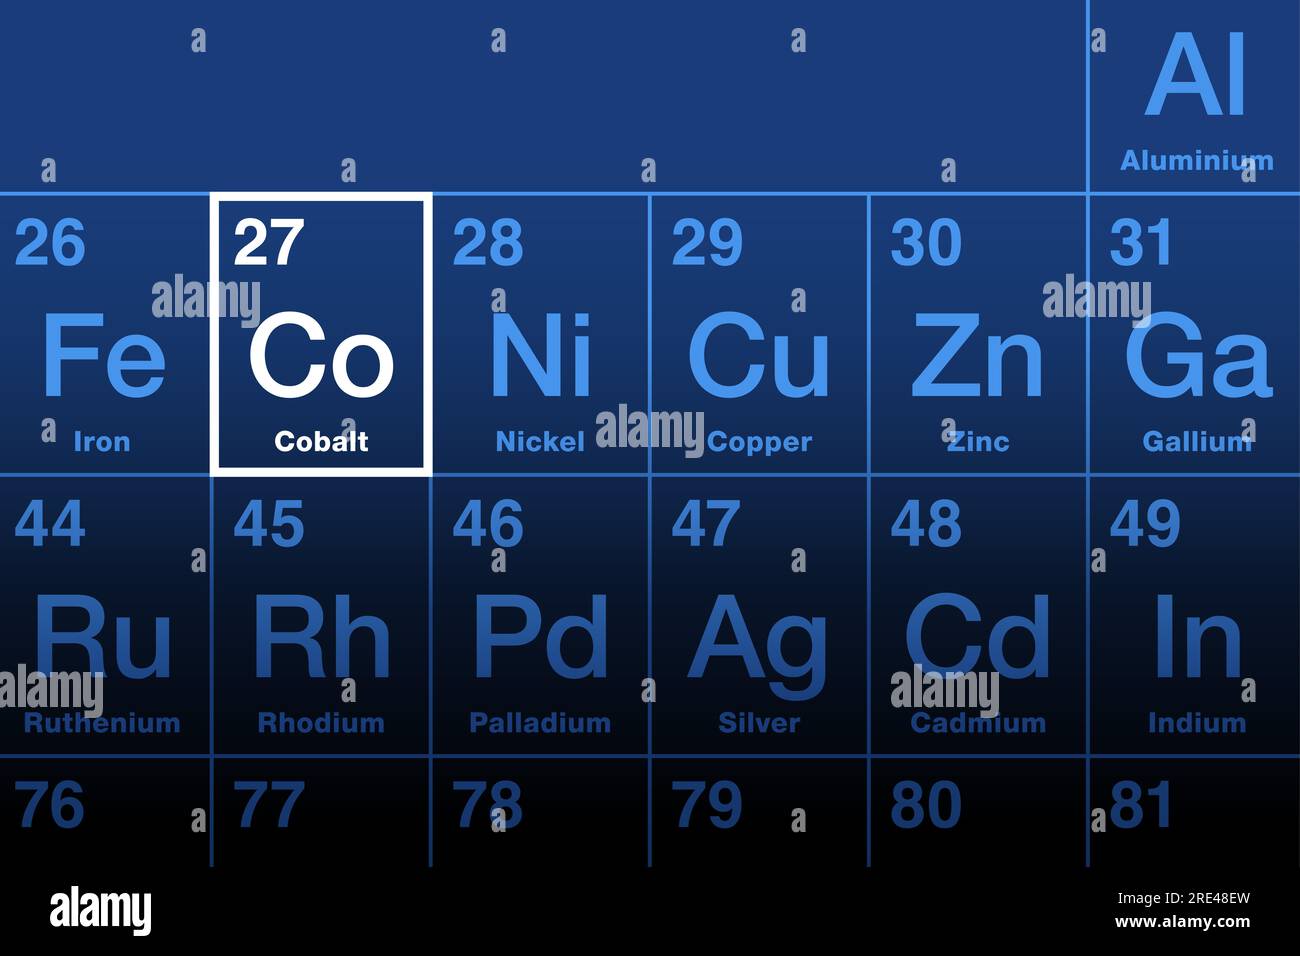 Cobalt element on the periodic table. Ferromagnetic transition metal with element symbol Co and atomic number 27, named after German name Kobold. Stock Photo